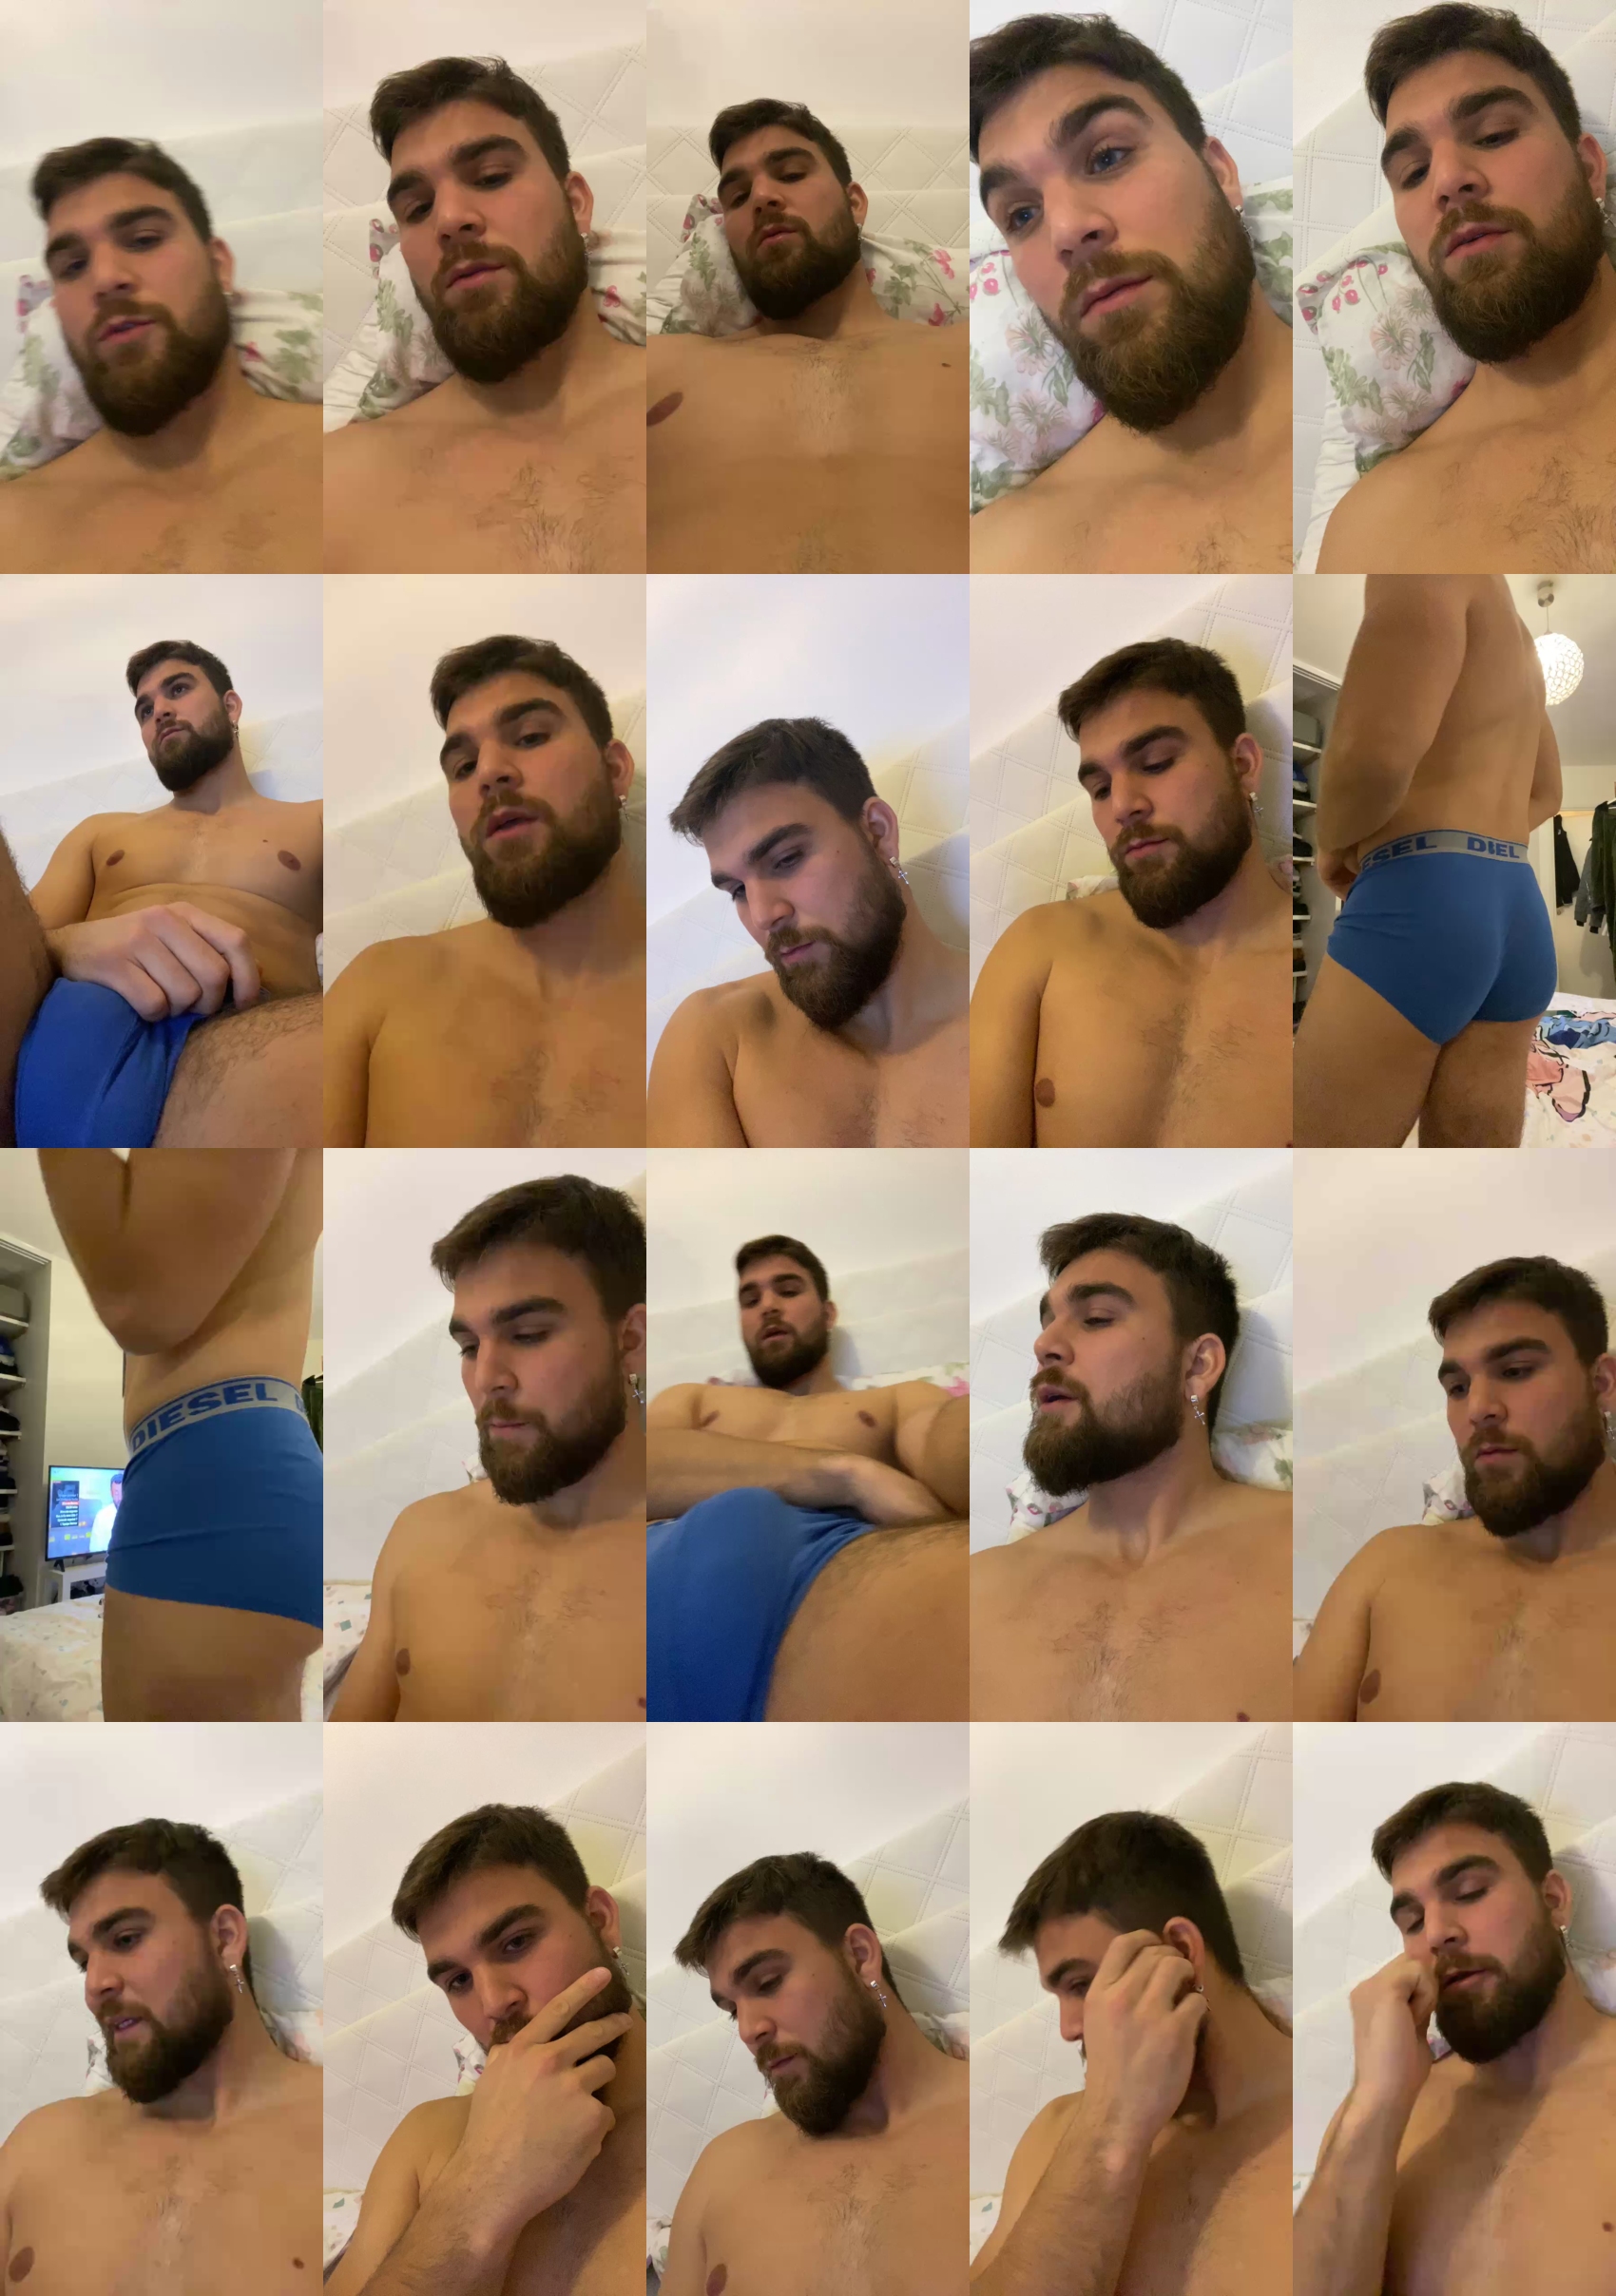 Prince_sexy8369 Cam4 14-01-2022 Recorded Video Download